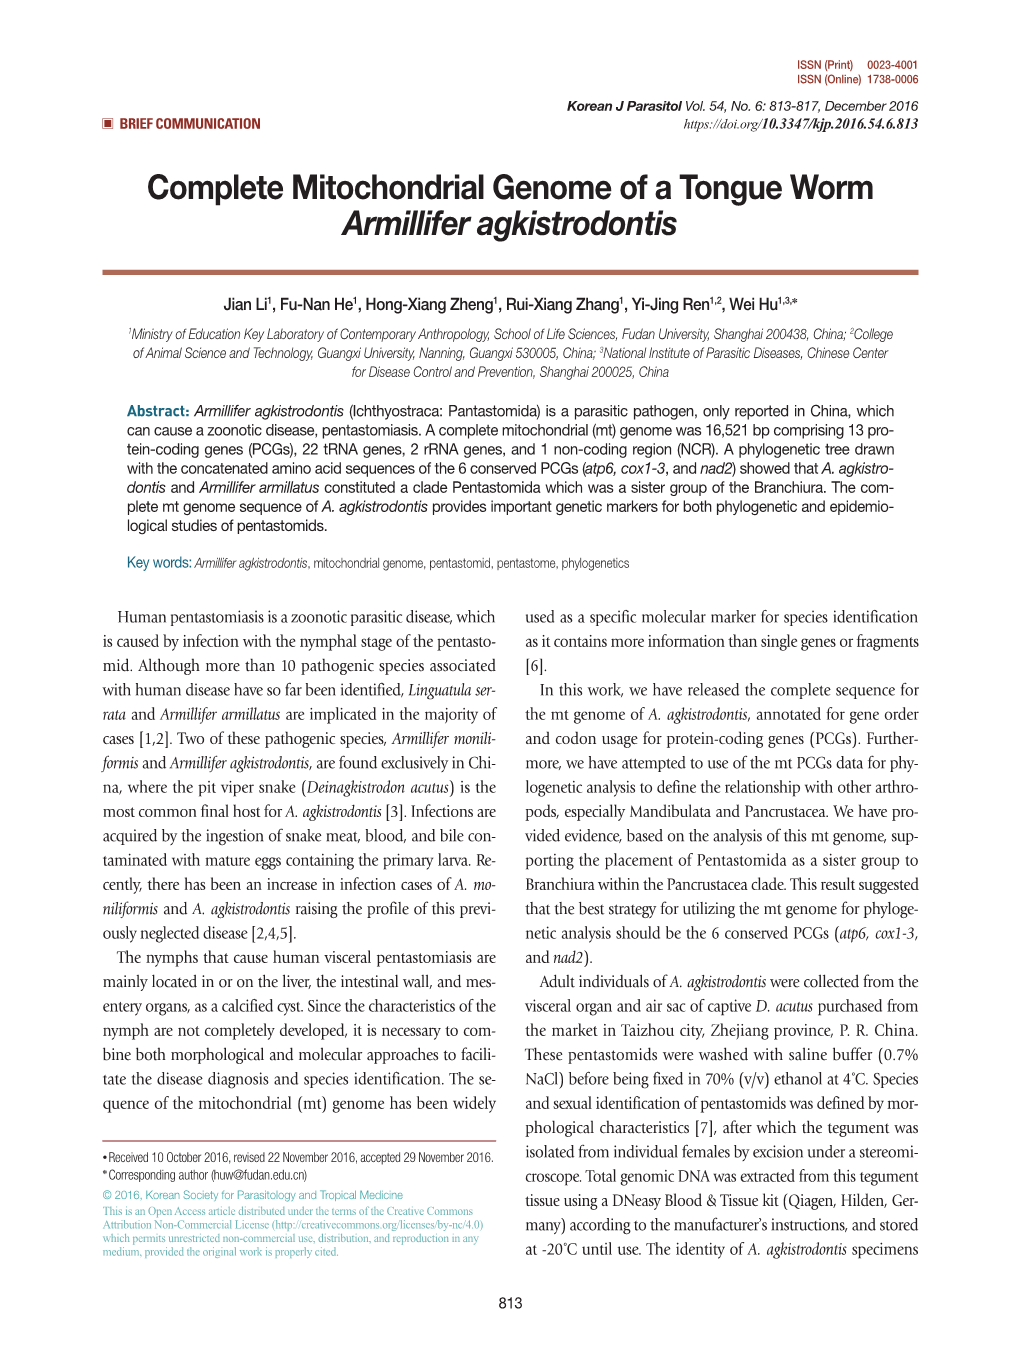 Complete Mitochondrial Genome of a Tongue Worm Armillifer Agkistrodontis